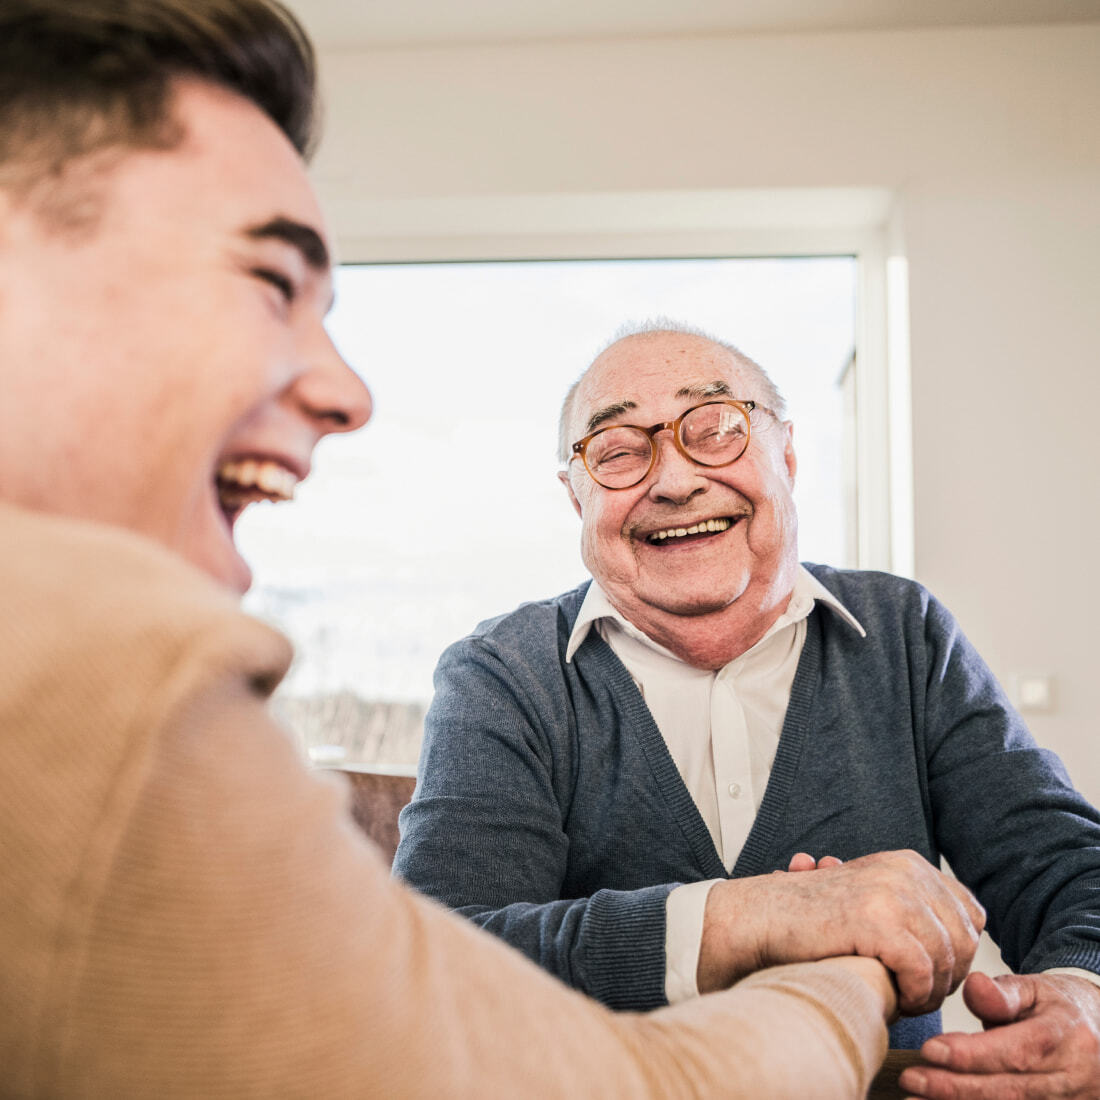 Elderly man and his young companion laughing and enjoying each other's company